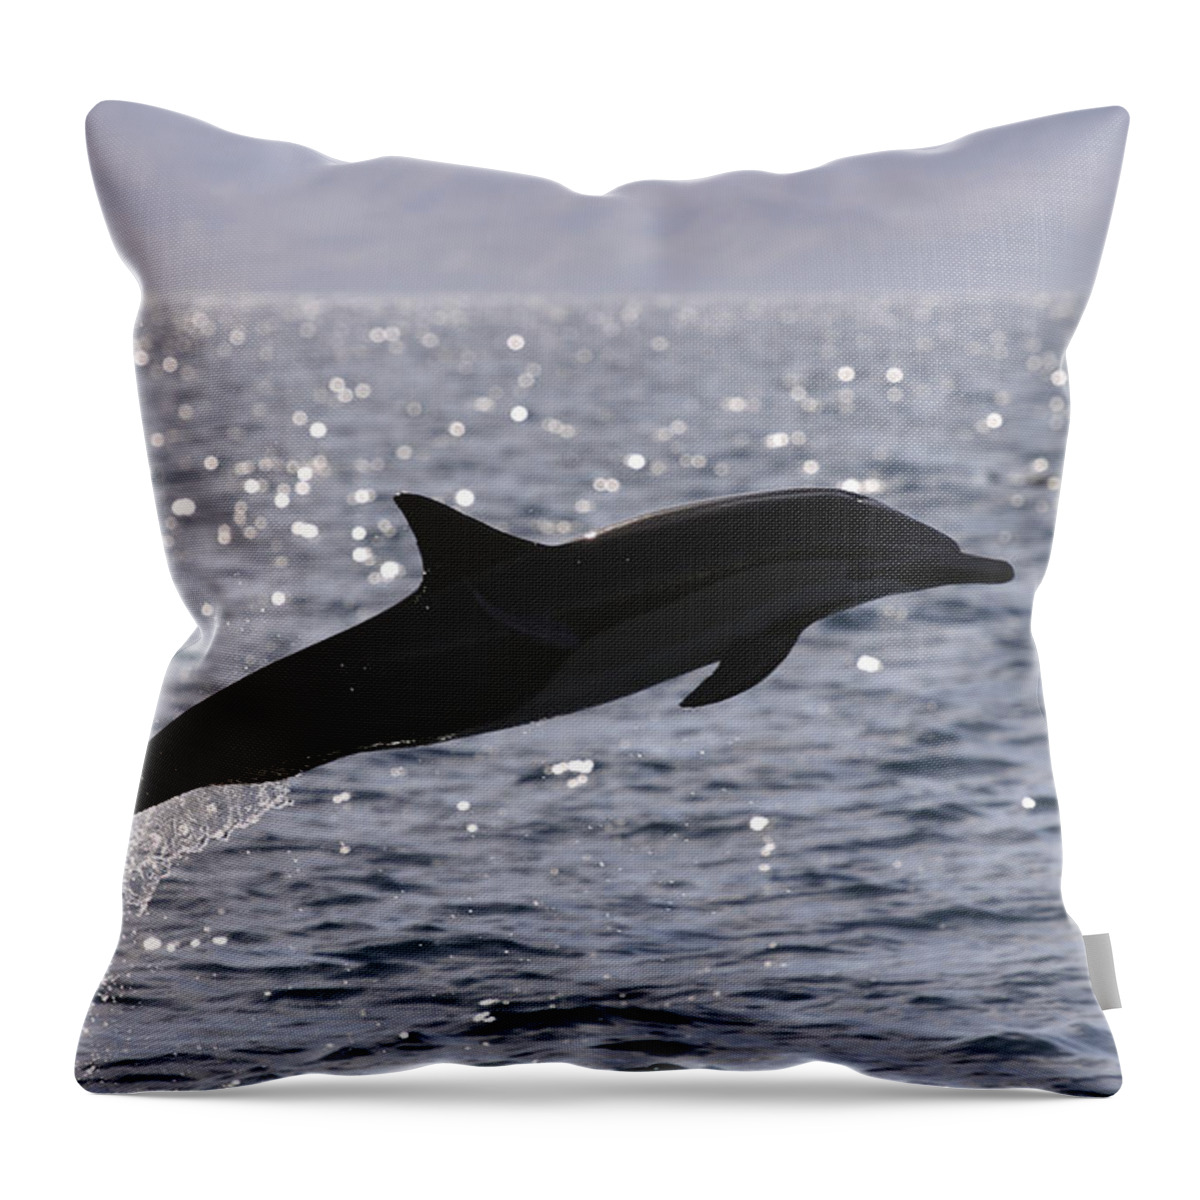 Feb0514 Throw Pillow featuring the photograph Short-beaked Common Dolphin Leaping Sea by Hiroya Minakuchi